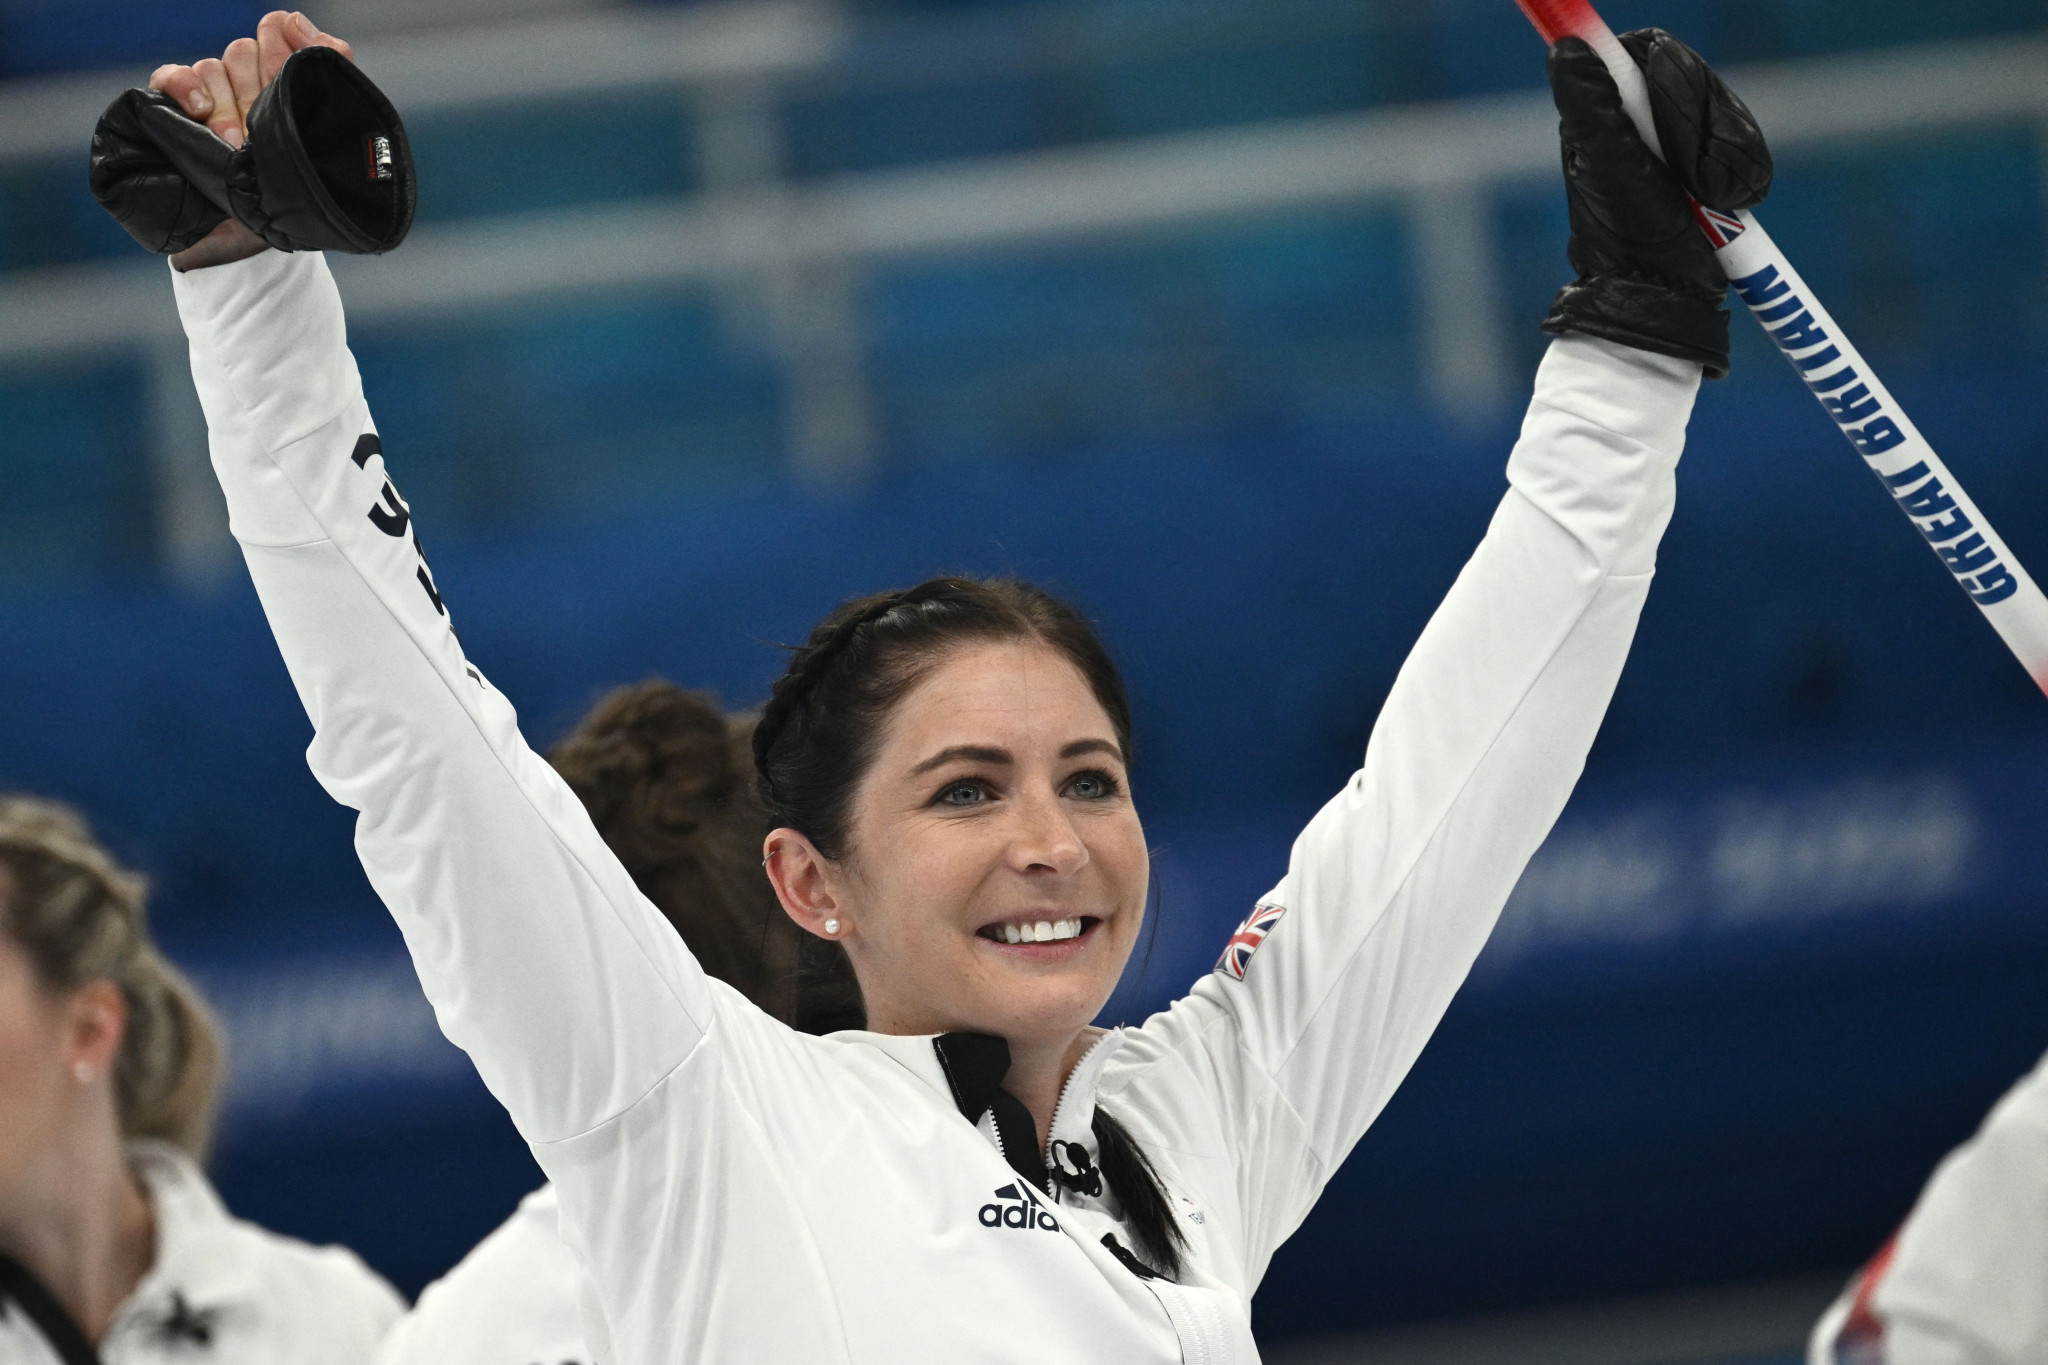 Eve Muirhead has retired from curling at the age of 32 ©Getty Images